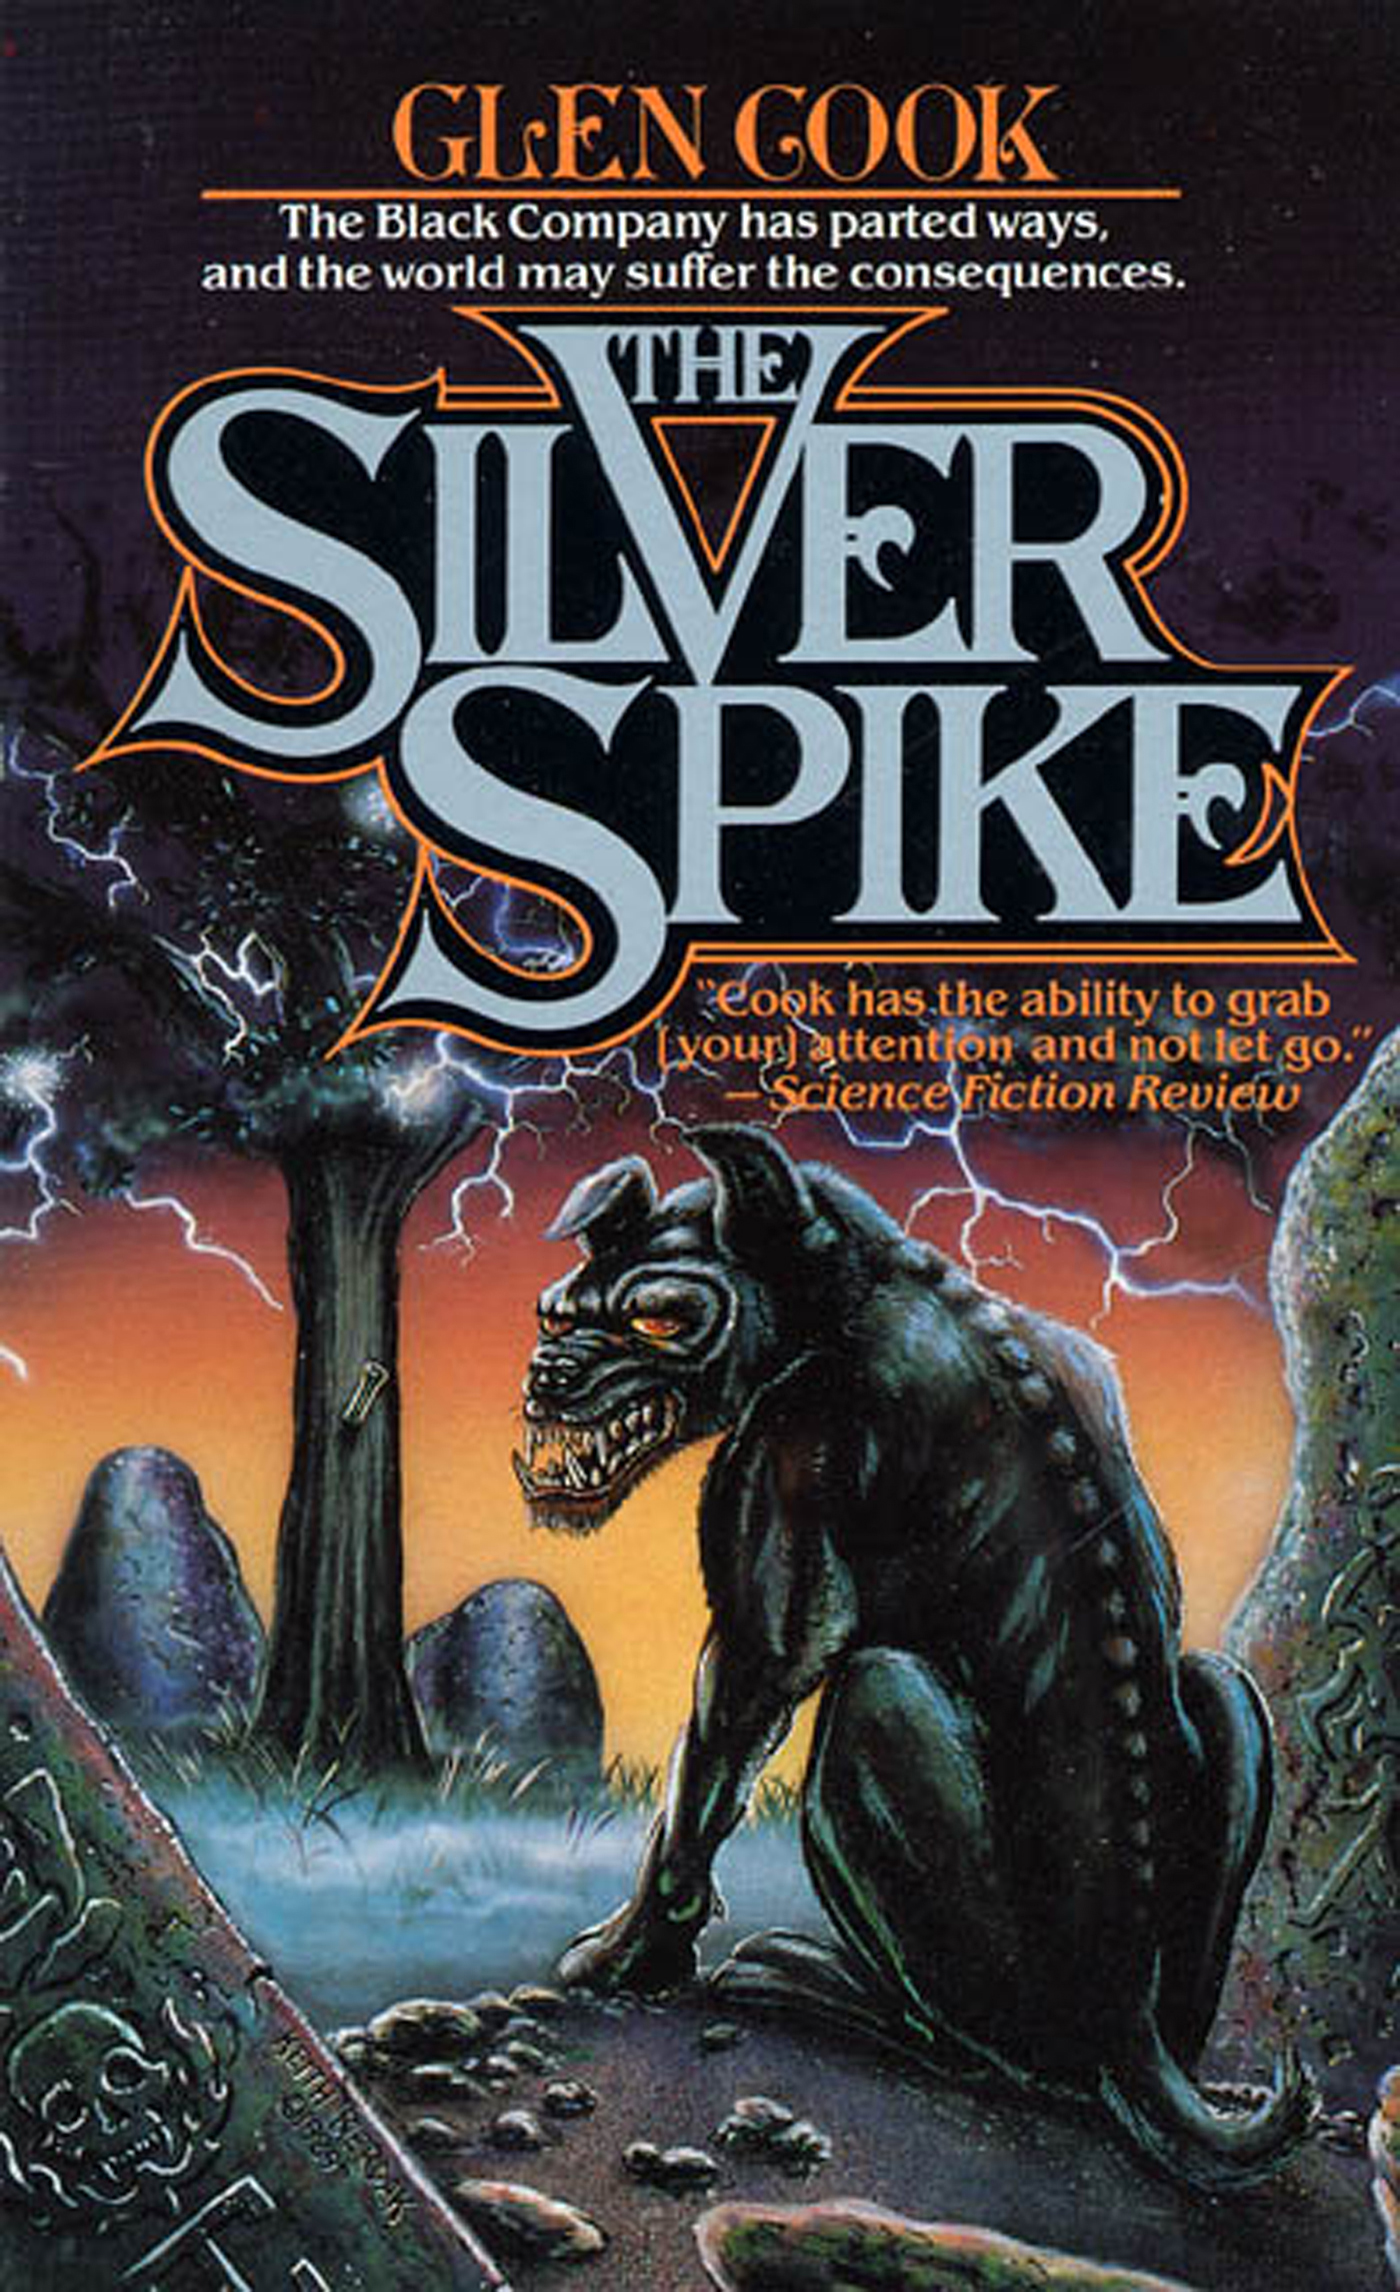 The Silver Spike : The Chronicles of the Black Company by Glen Cook